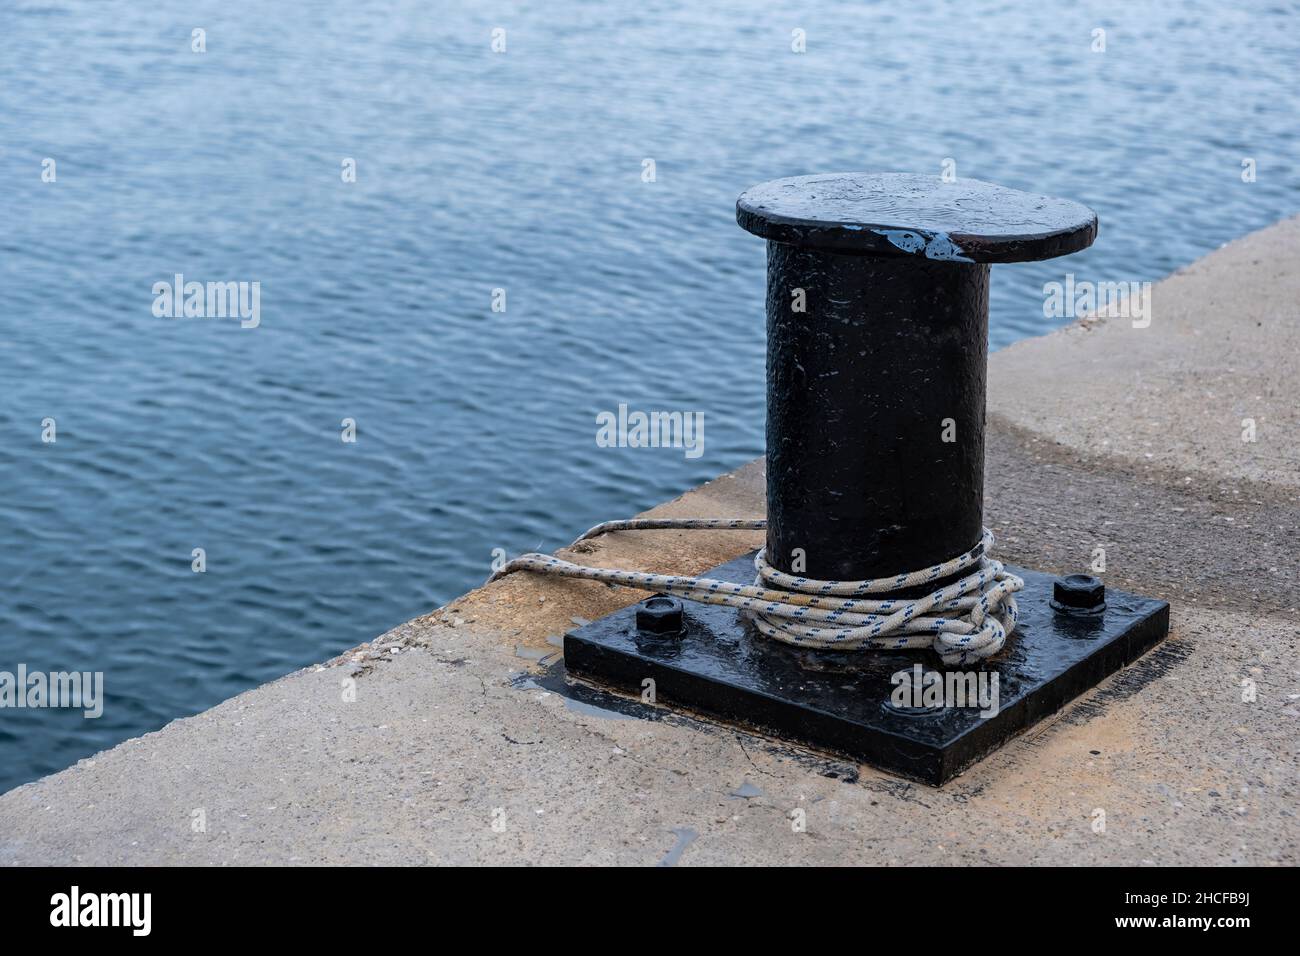 Ship mooring rope around a port bollard on harbor pier, rippled sea water background, copy space. Black metal post anchored on quay concrete floor Stock Photo